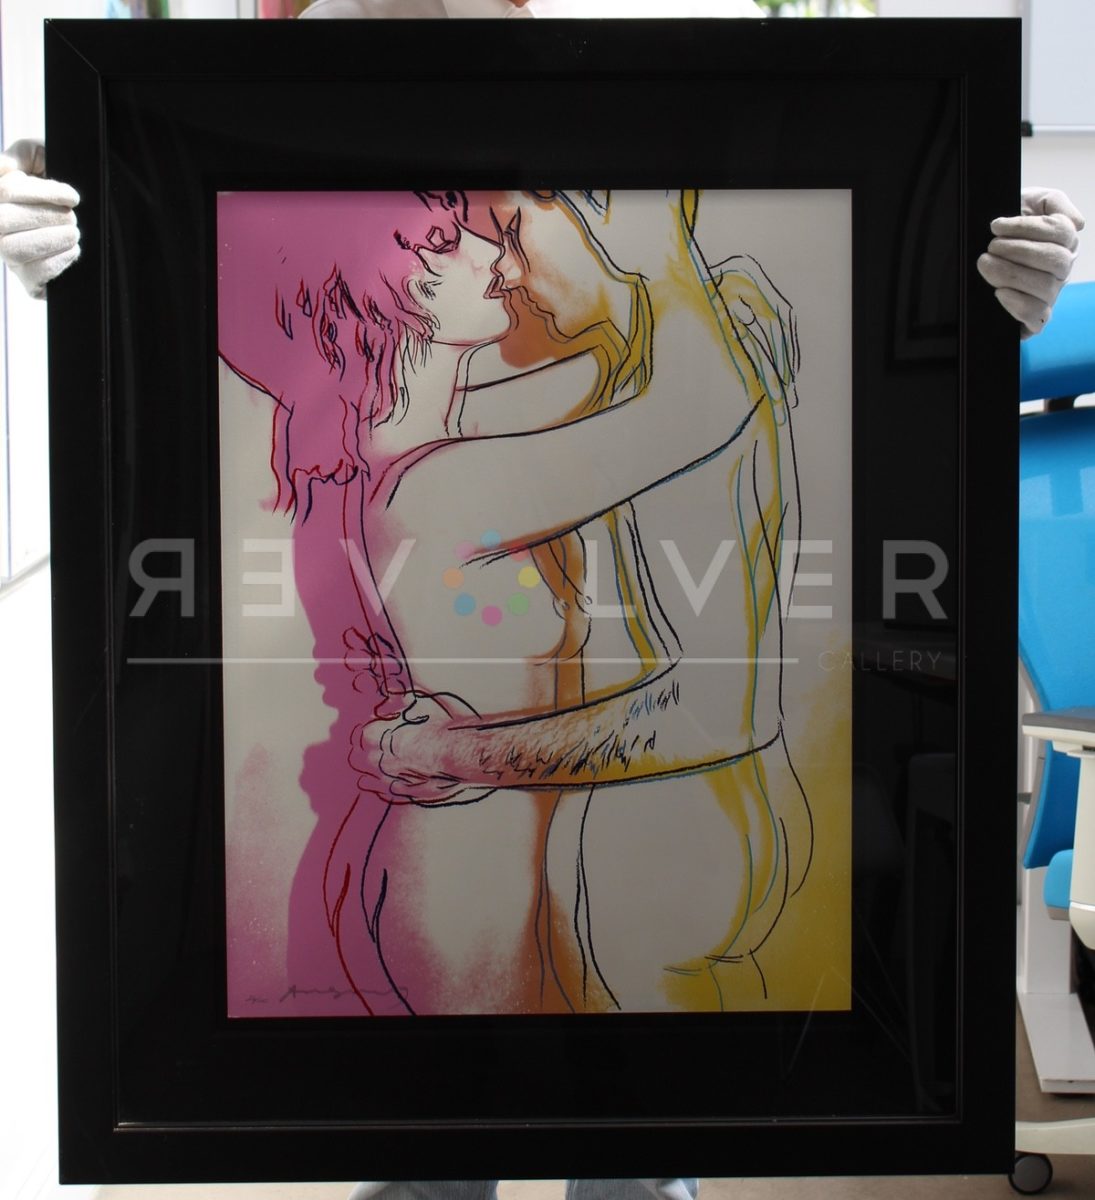 Andy Warhol Love 312 screenprint framed and being held by someone wearing white gloves.